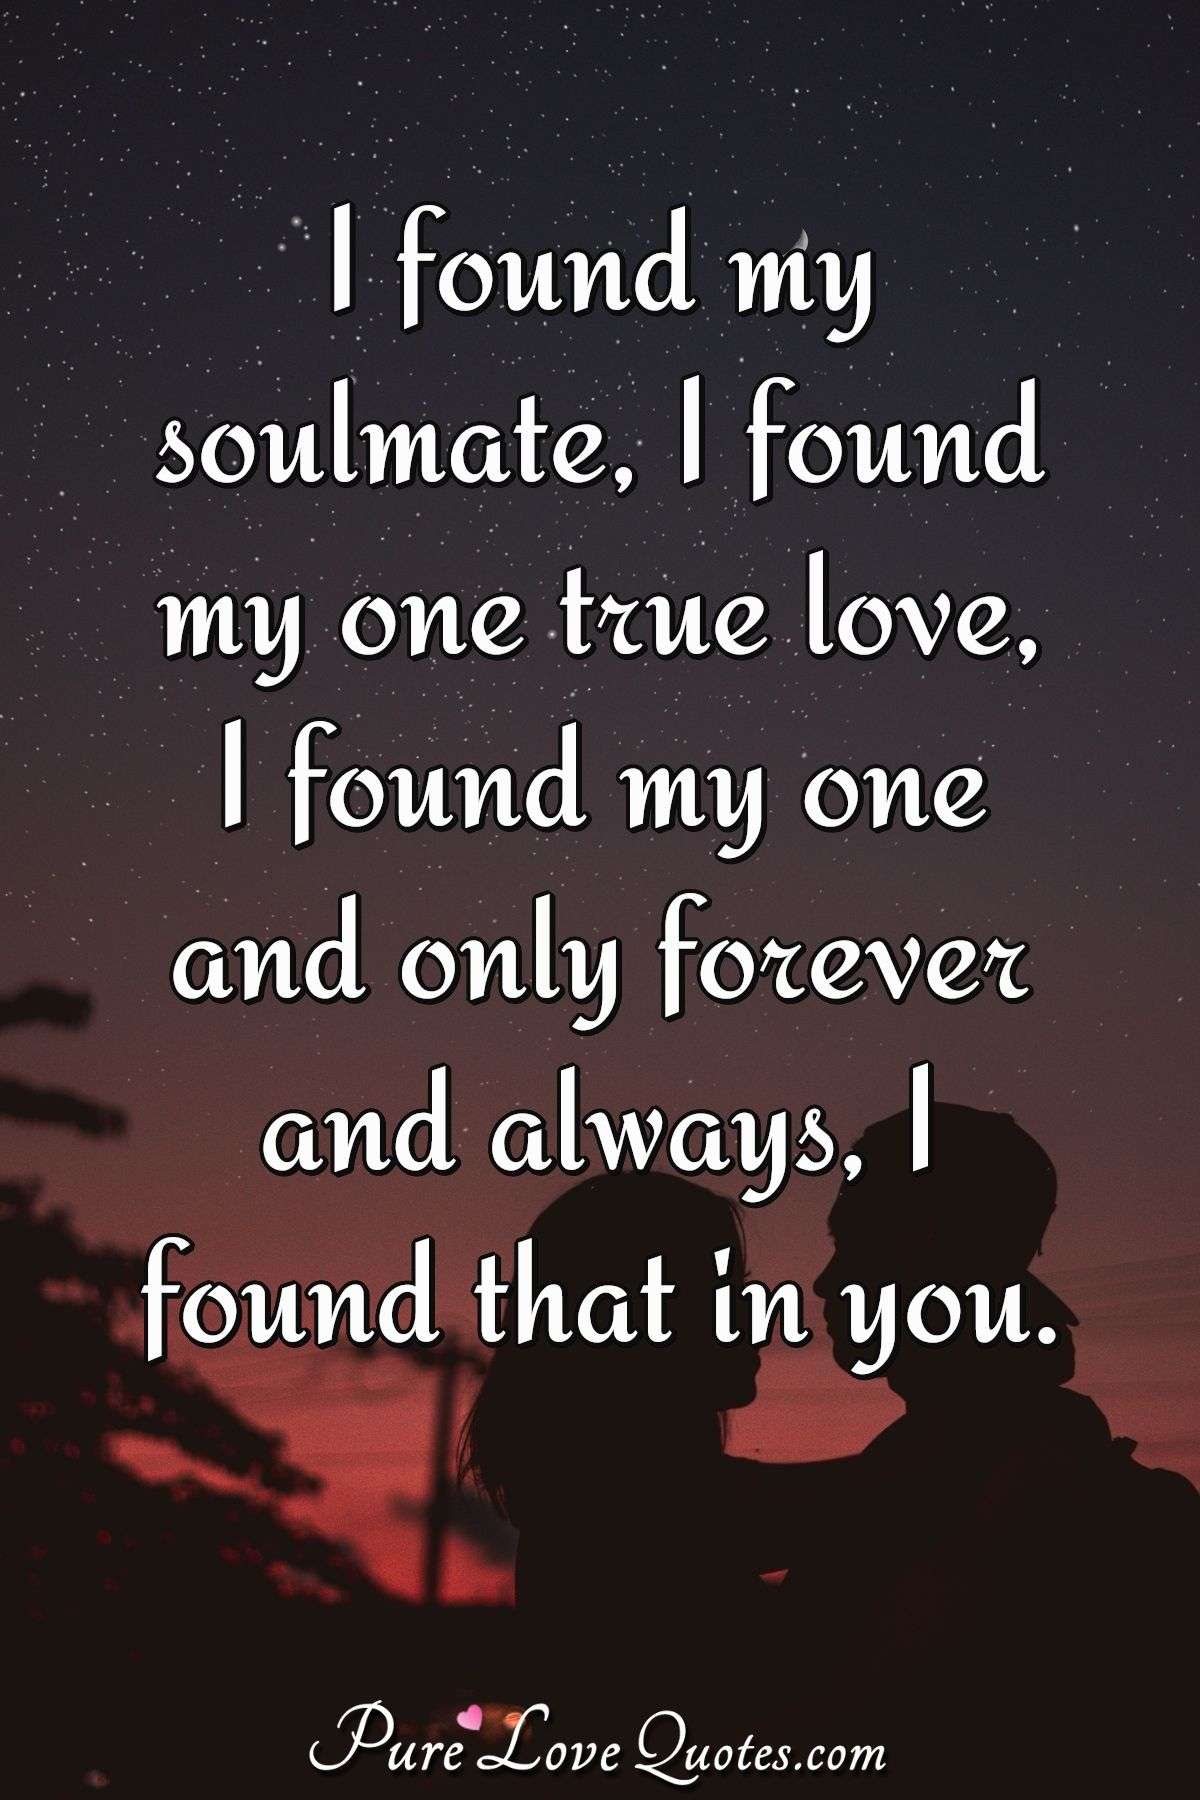 you are my soulmate quotes